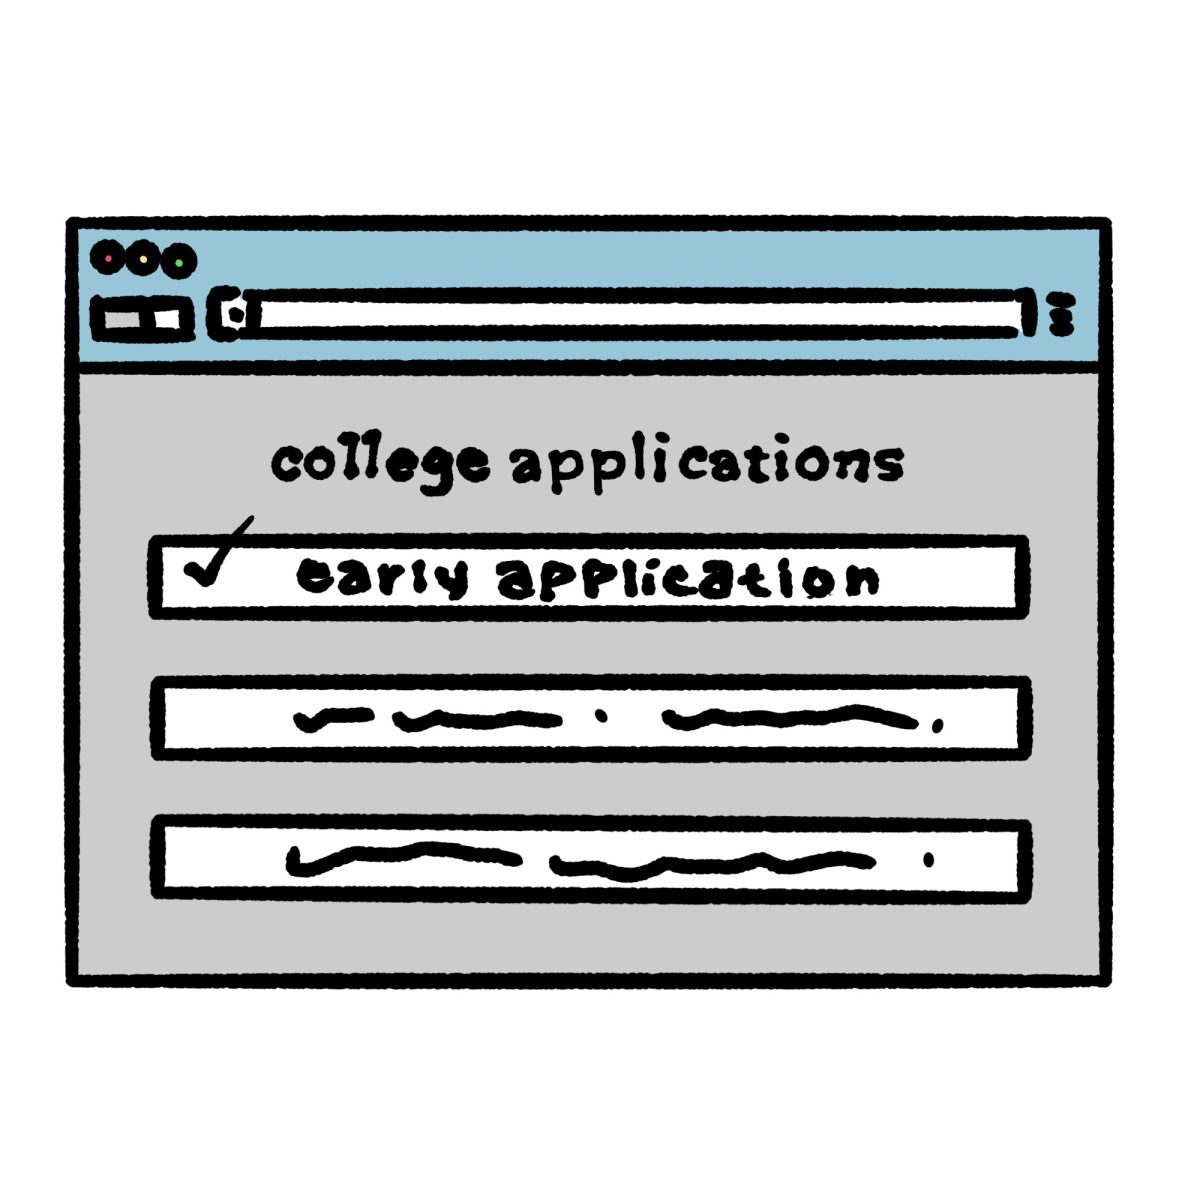 Although seniors must select whether they would like to apply early decision, early action or regular before submitting a college application, they can change their application type up to the application deadline.